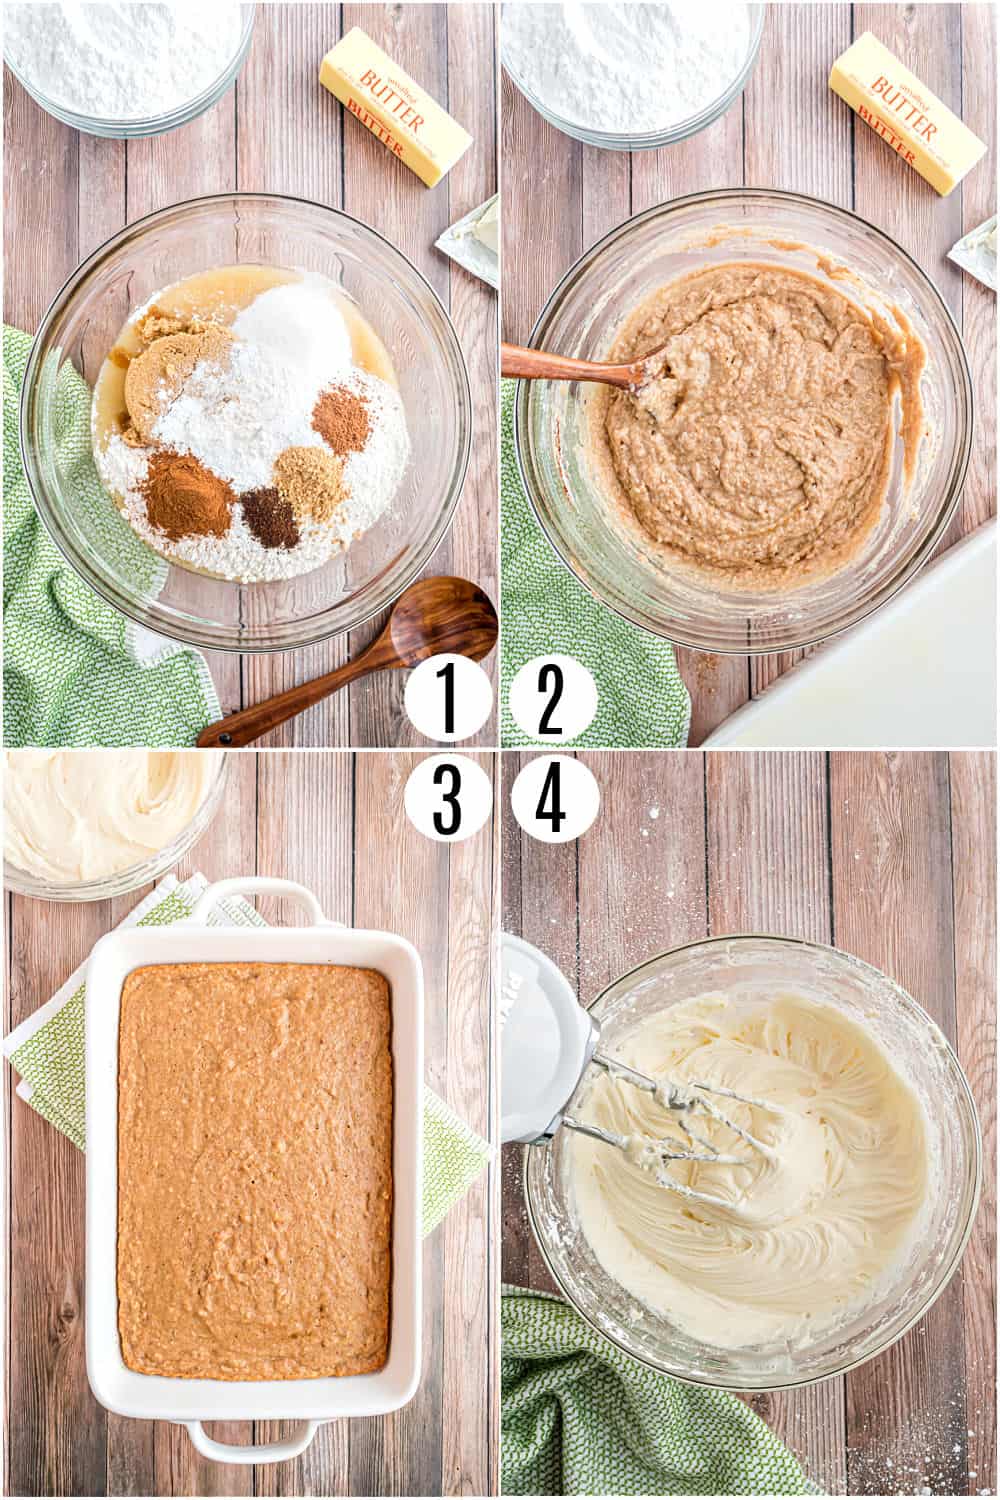 Step by step photos showing how to make applesauce cake.